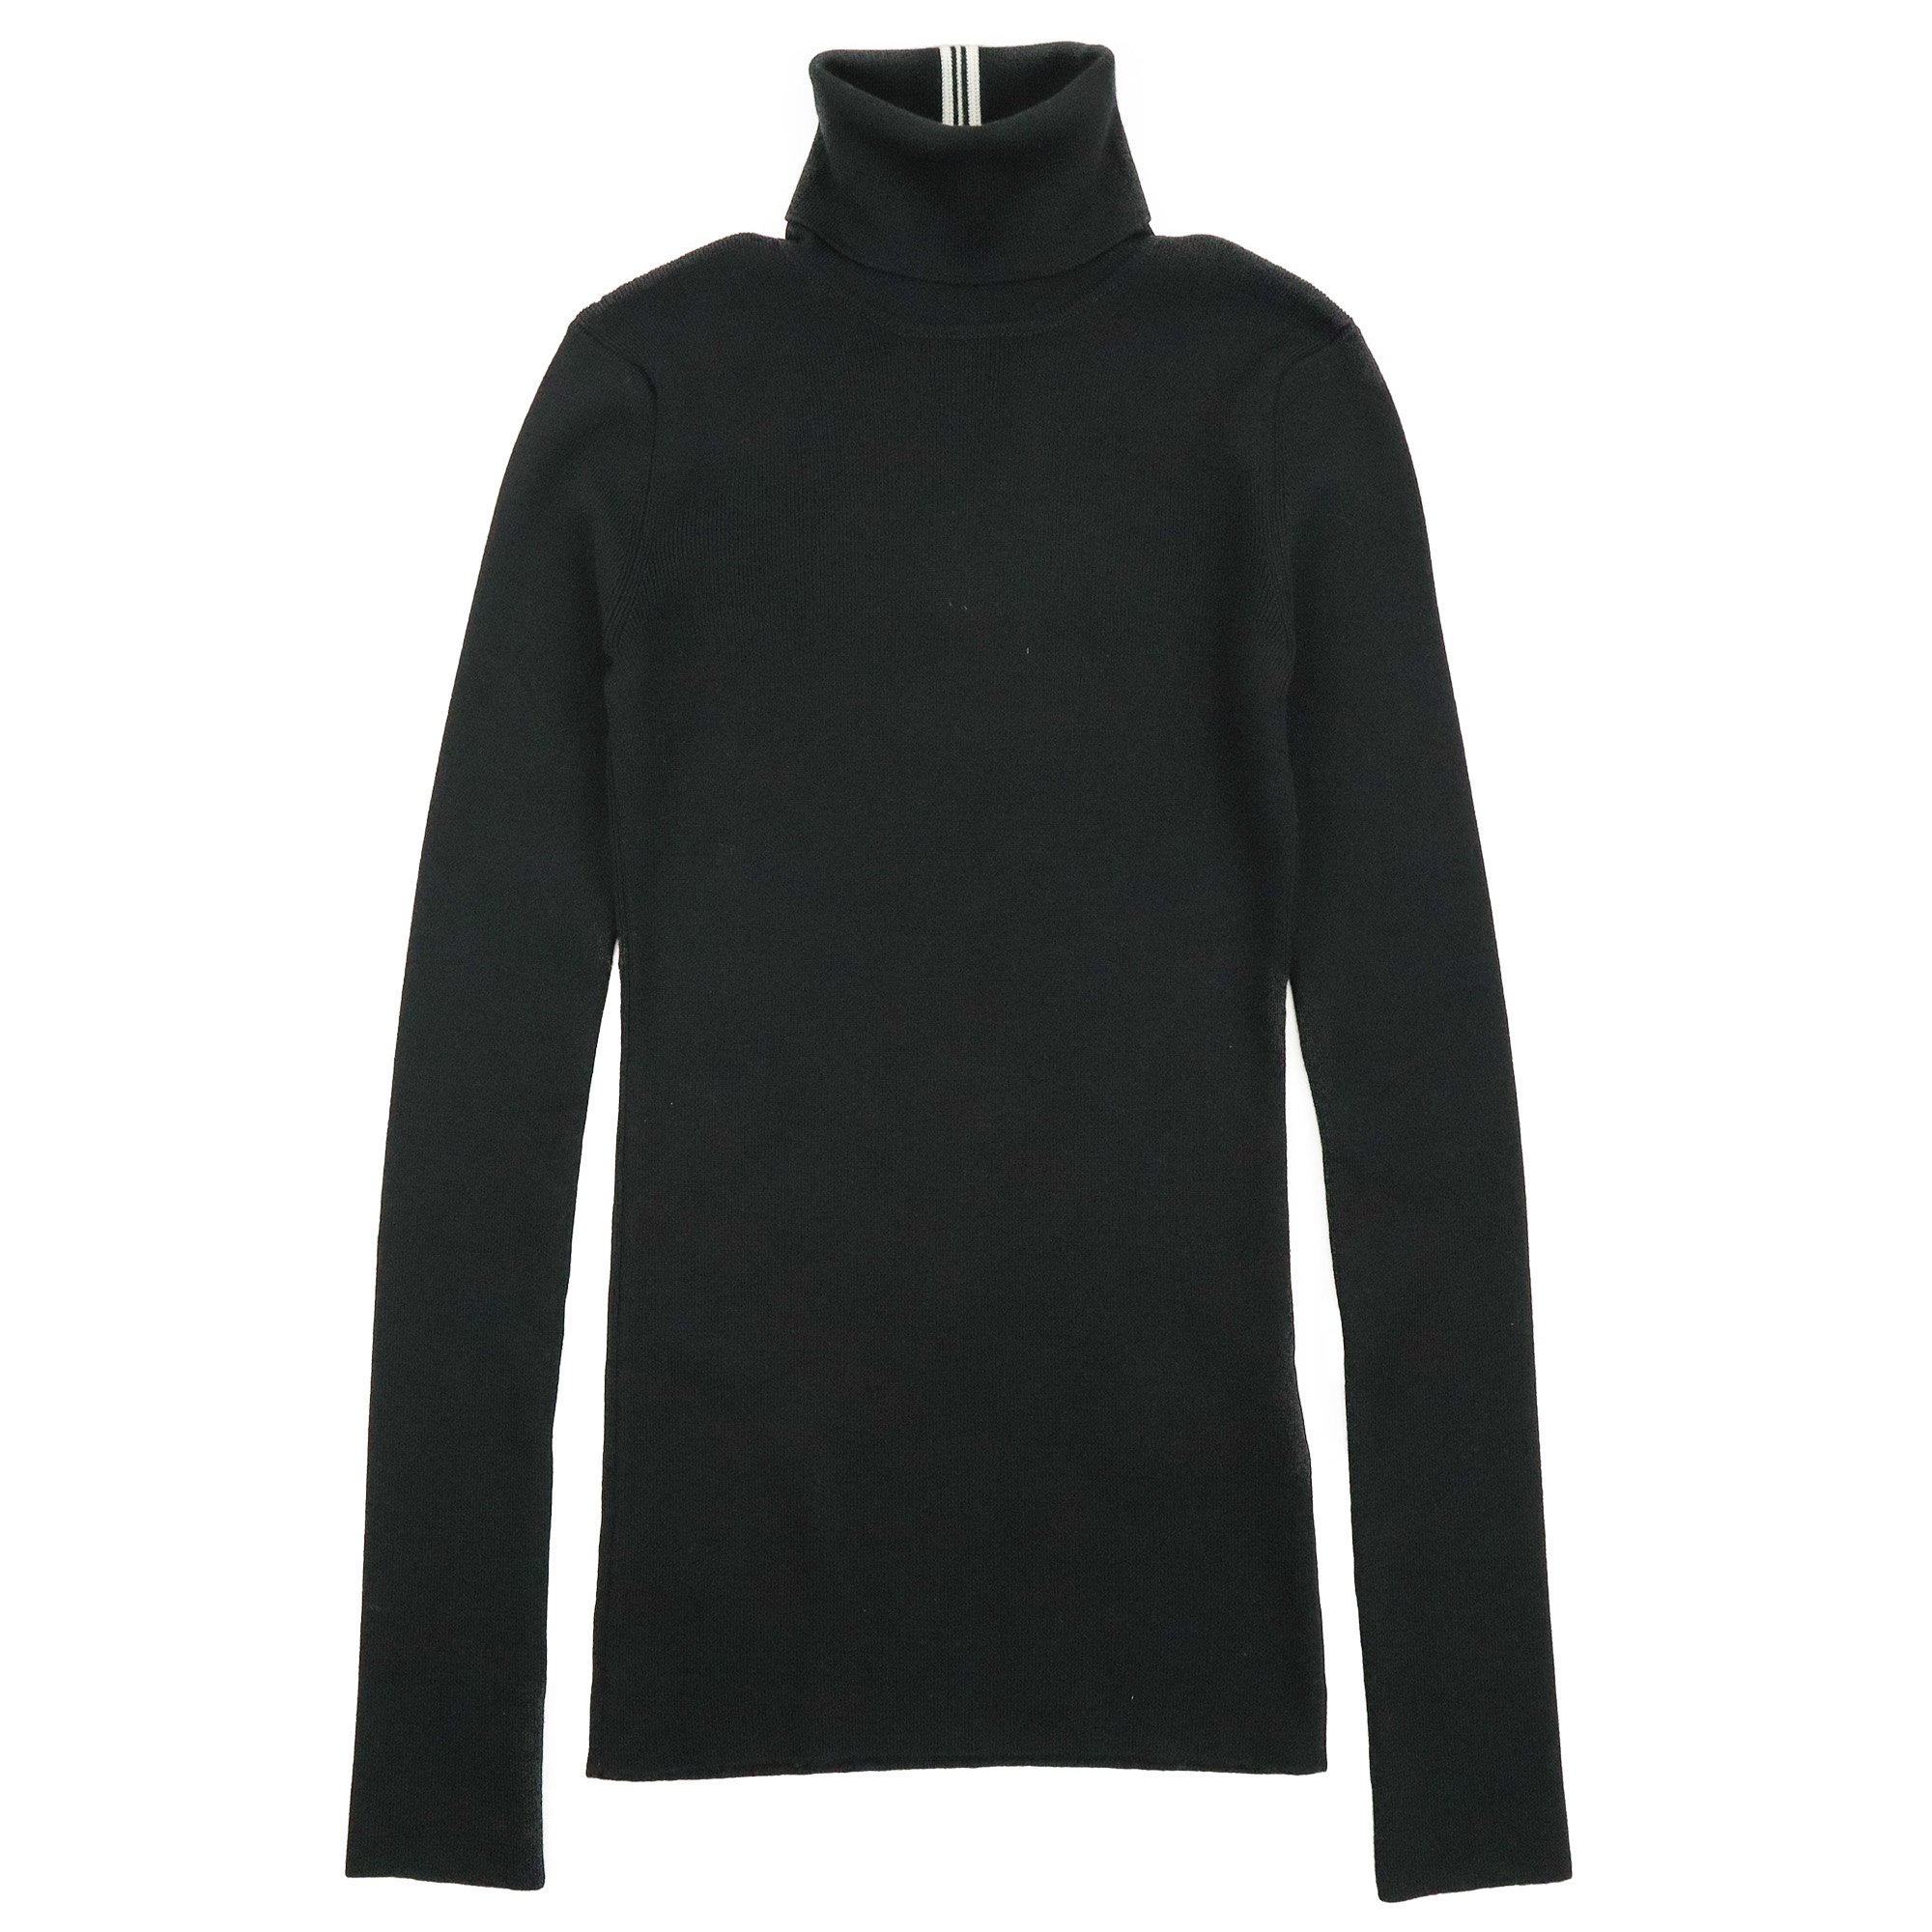 <img class='new_mark_img1' src='https://img.shop-pro.jp/img/new/icons7.gif' style='border:none;display:inline;margin:0px;padding:0px;width:auto;' />VICTORIA BECKHAM POLO NECK KNITBLACK